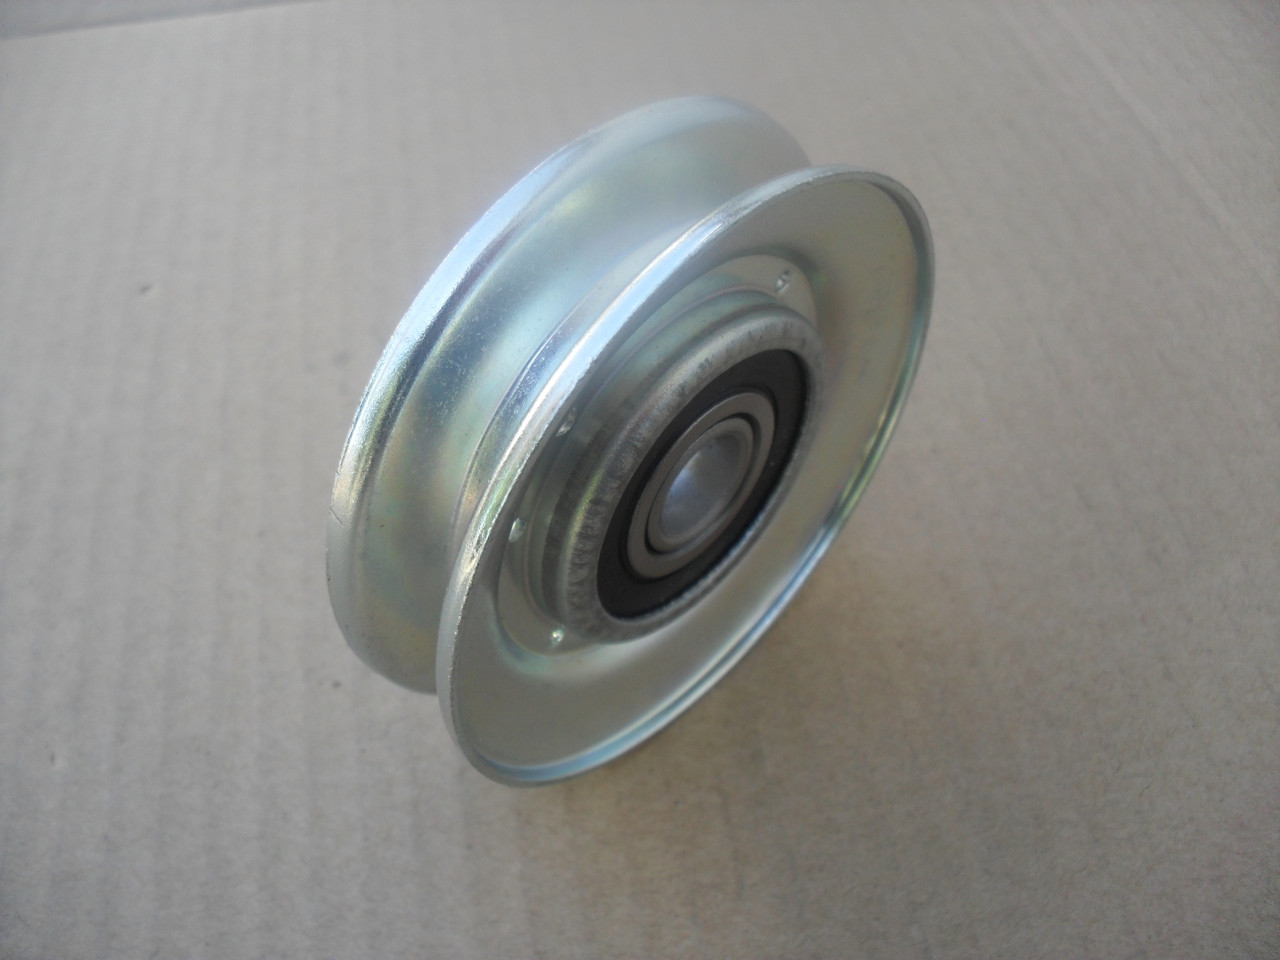 Deck Idler Pulley for Craftsman 20613, 420613, 420613MA, 91178, 091178, Made In USA, Metal, Height: 3/4" ID: 1/2" OD: 3"